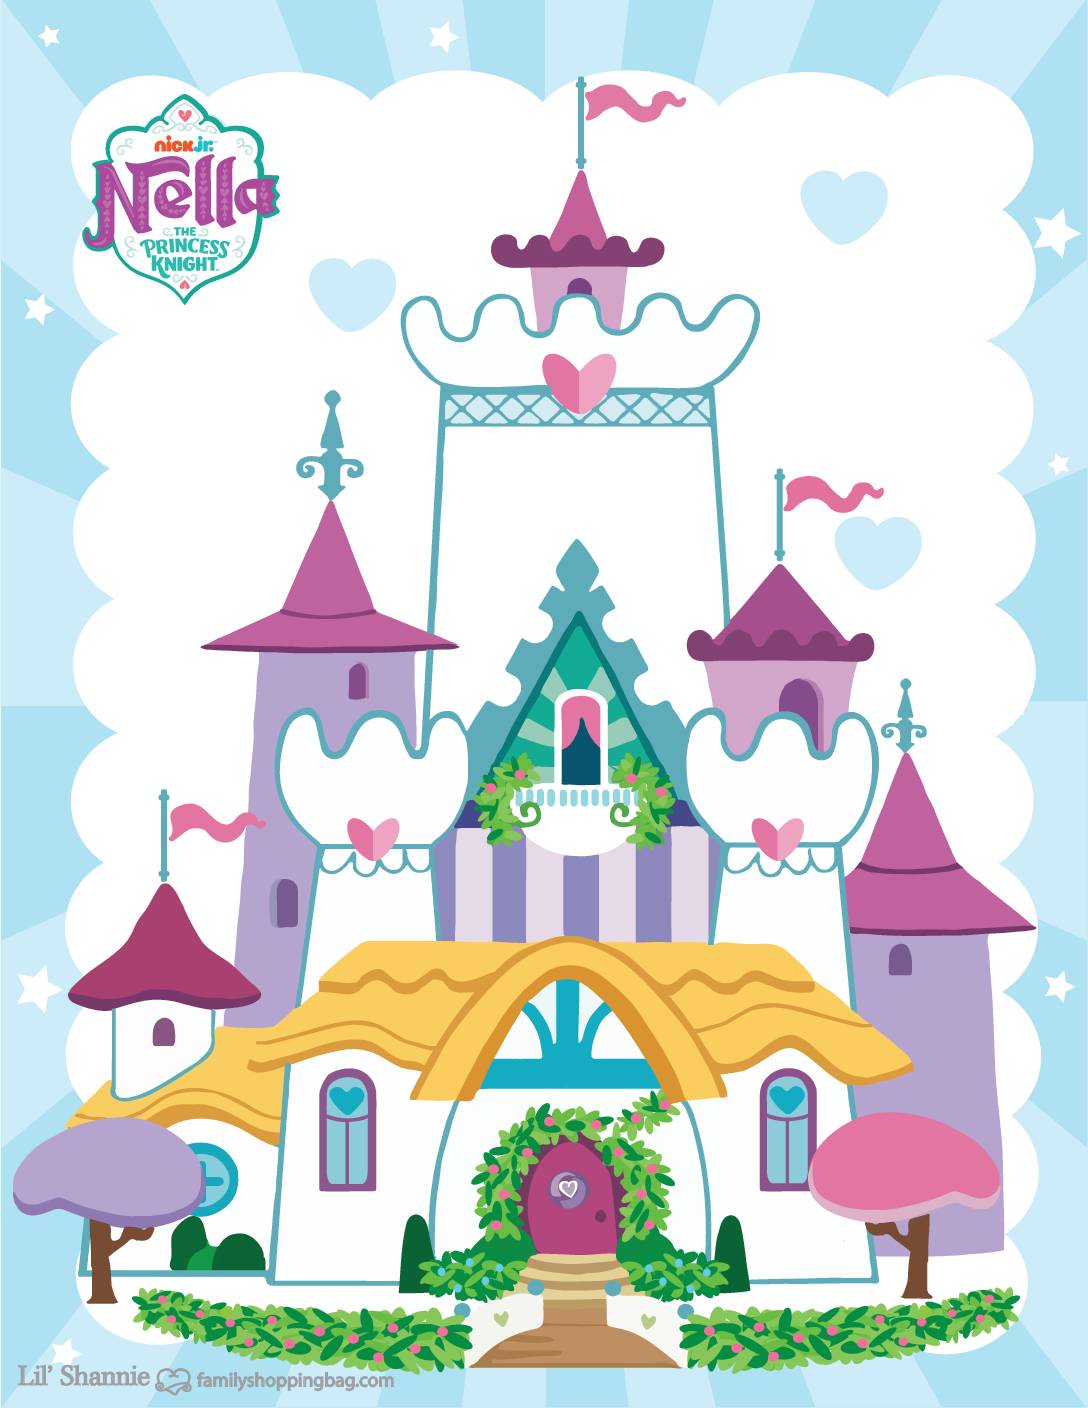 Nella Knight 2 Party Wall Pic Party Decorations